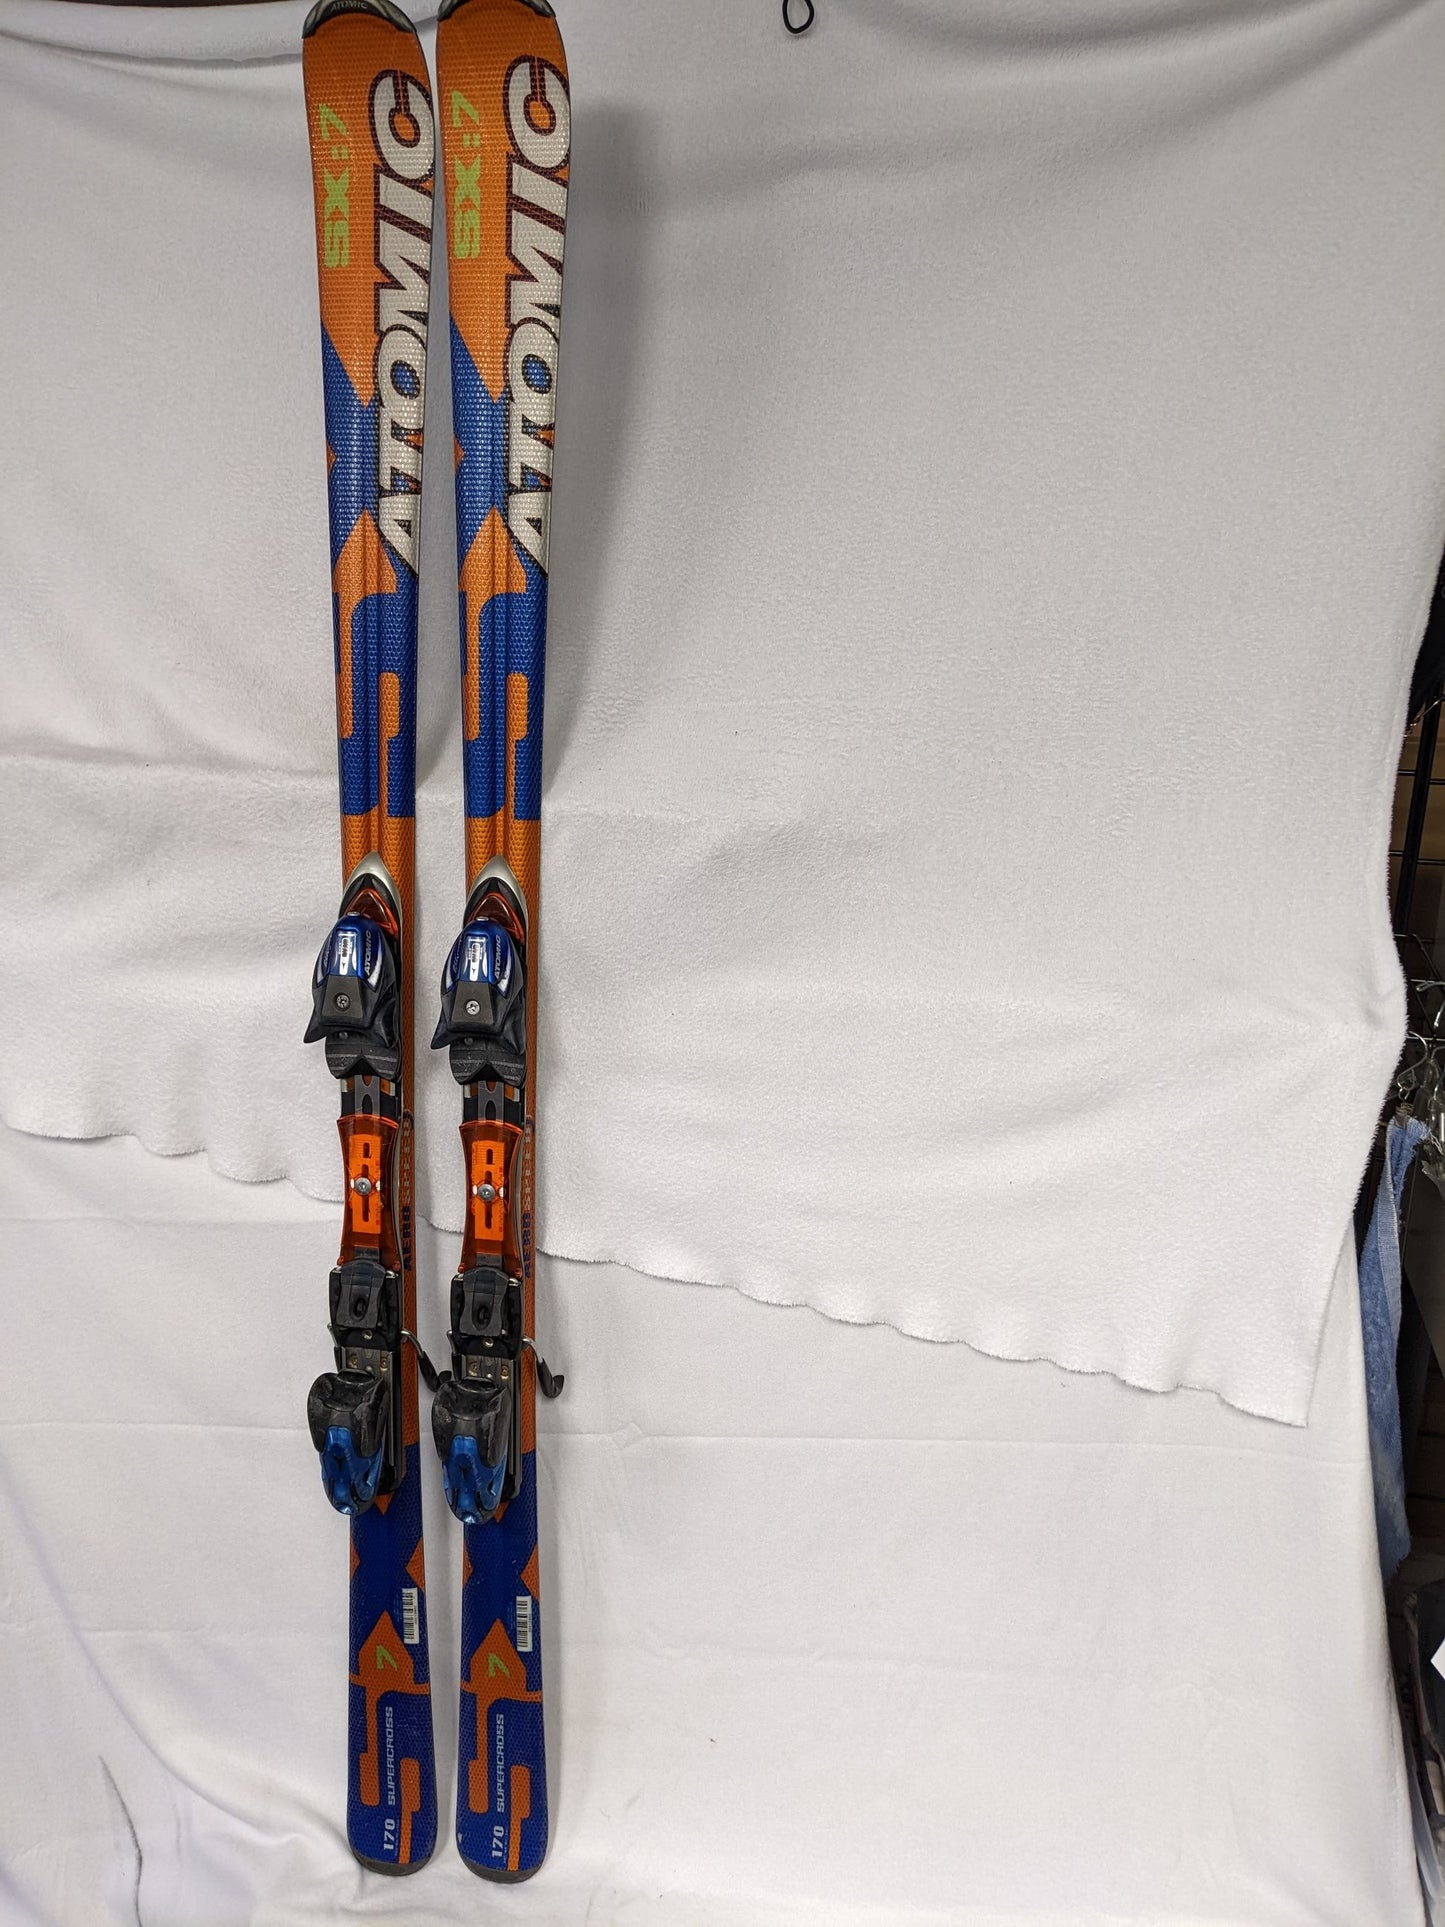 Atomic Supercross 7 Aerospeed  Skis with Atomic Bindings Size 170 Cm Color Gold Condition Used